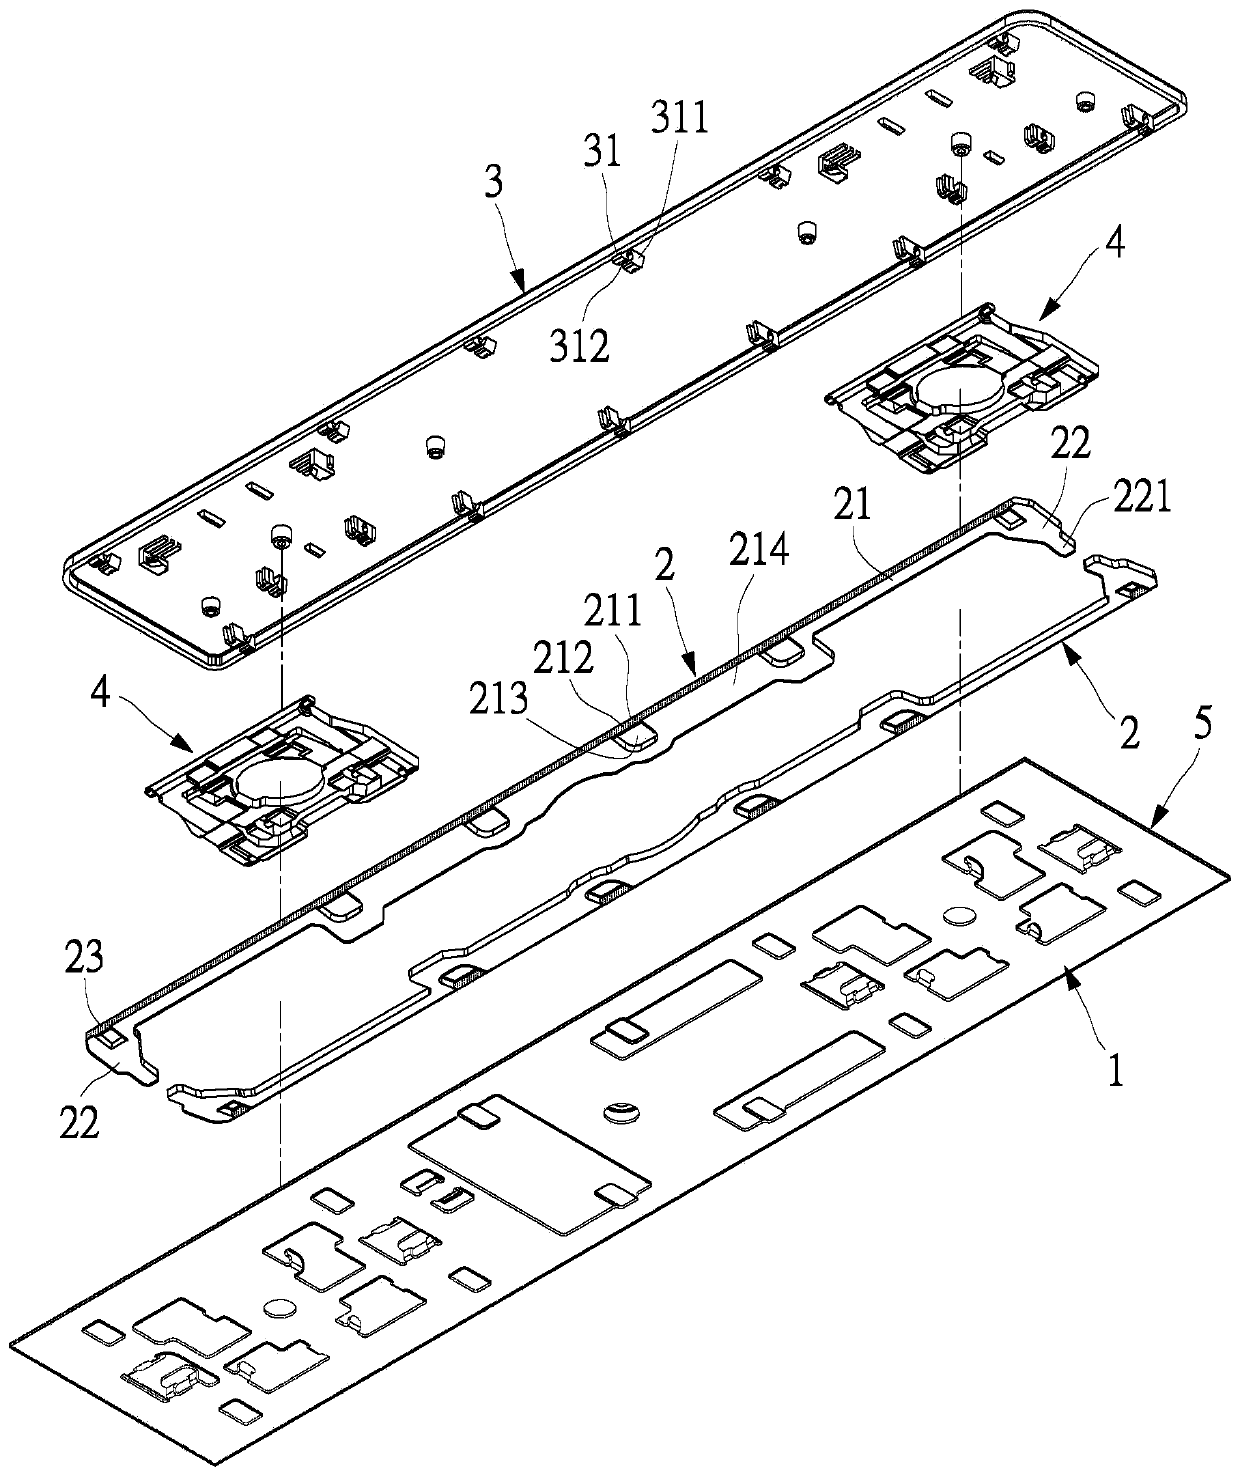 Button device and its balance bar structure